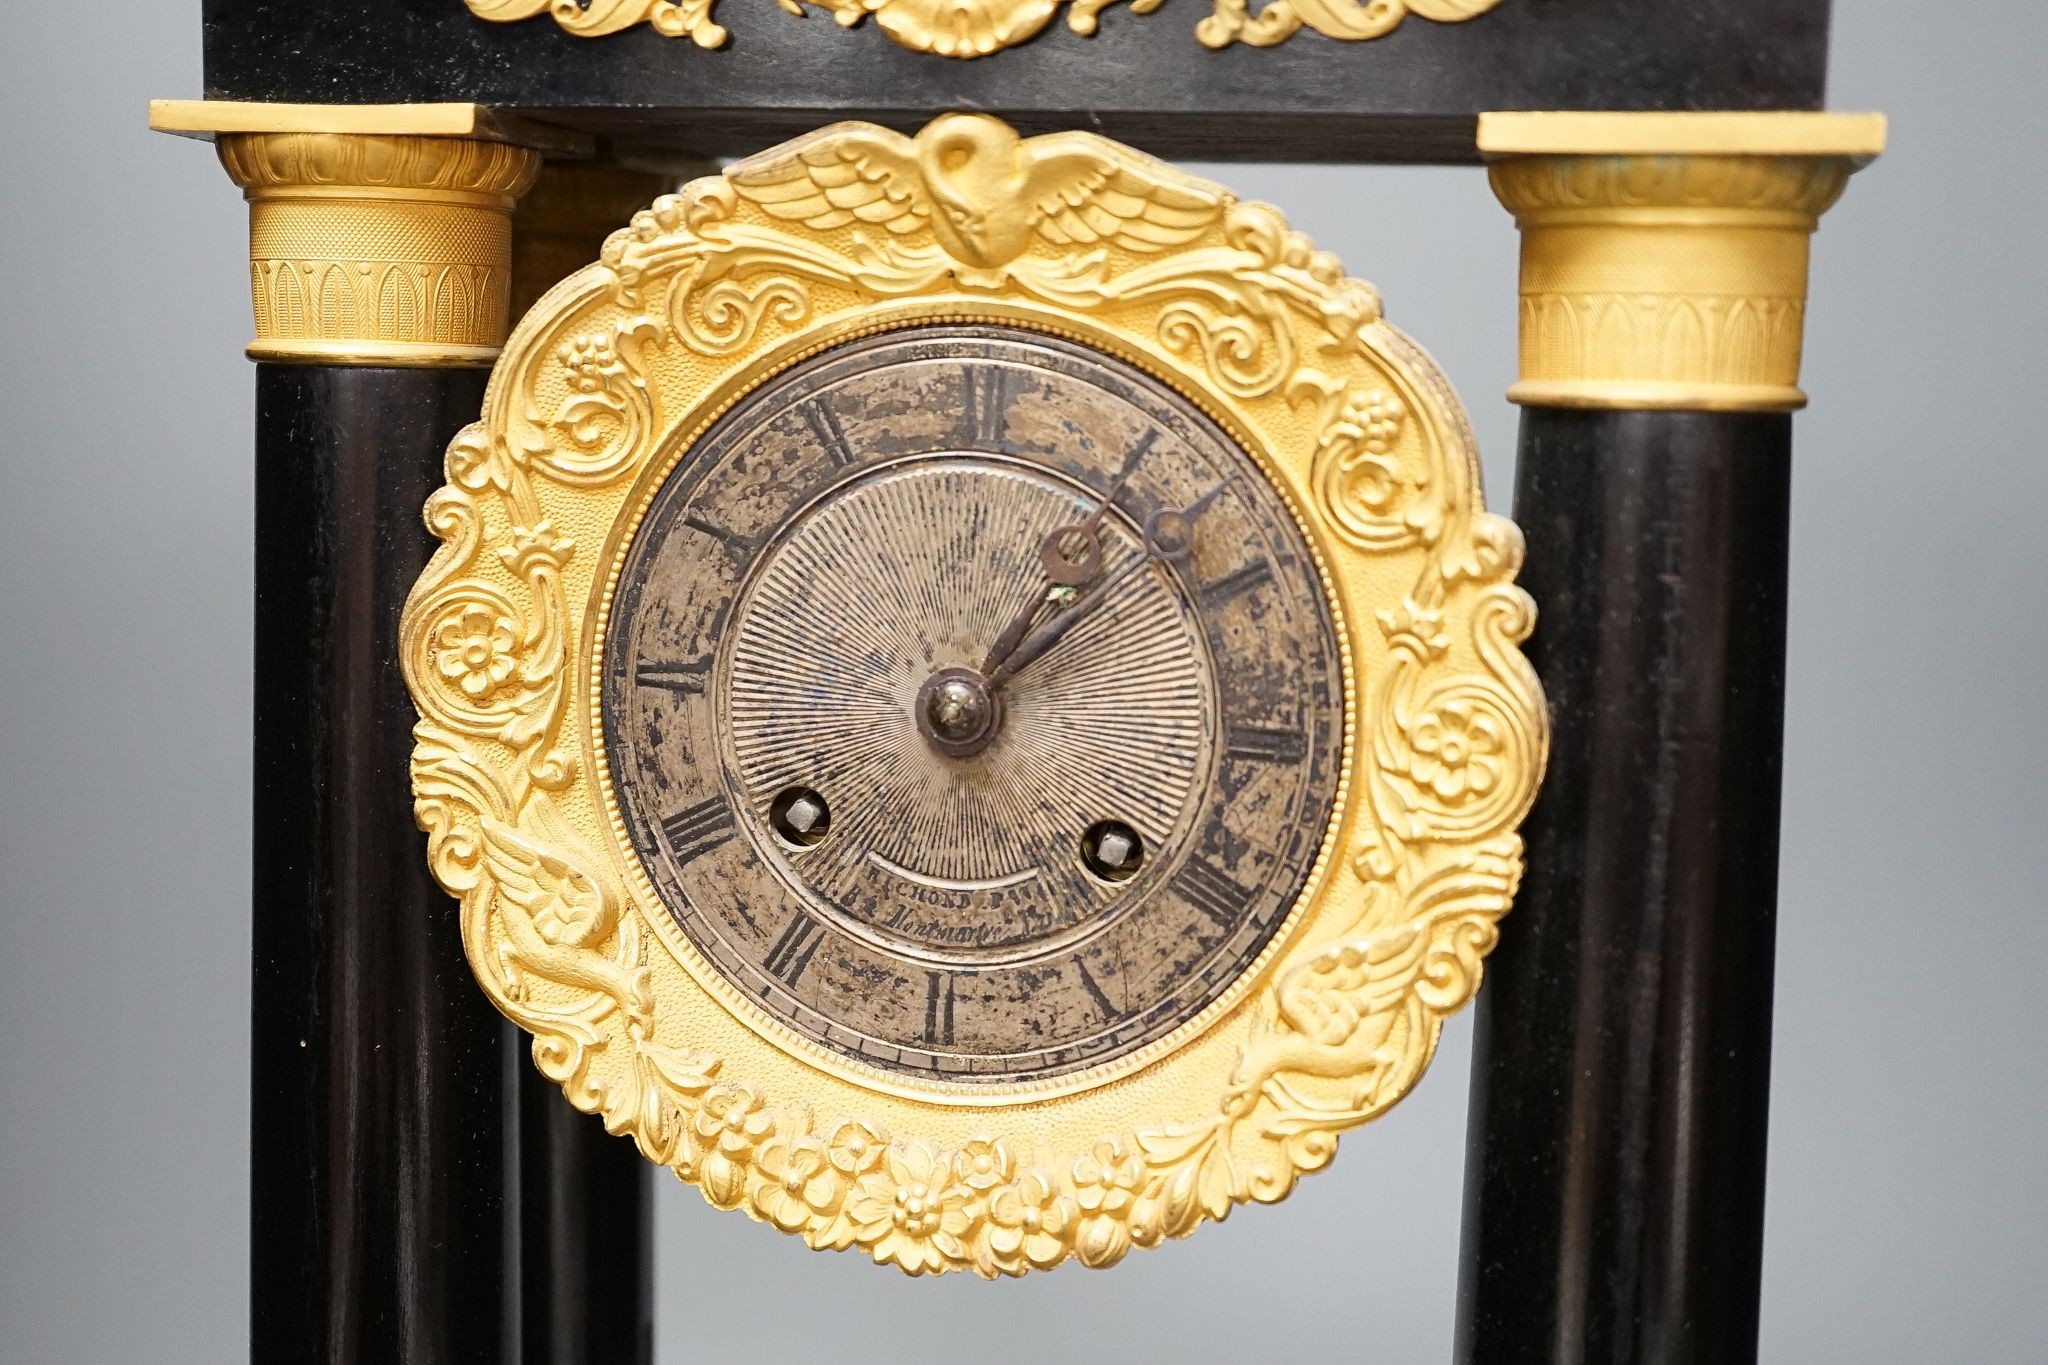 A 19th century ebonised portico mantel clock with brass mounts, 46cms high.